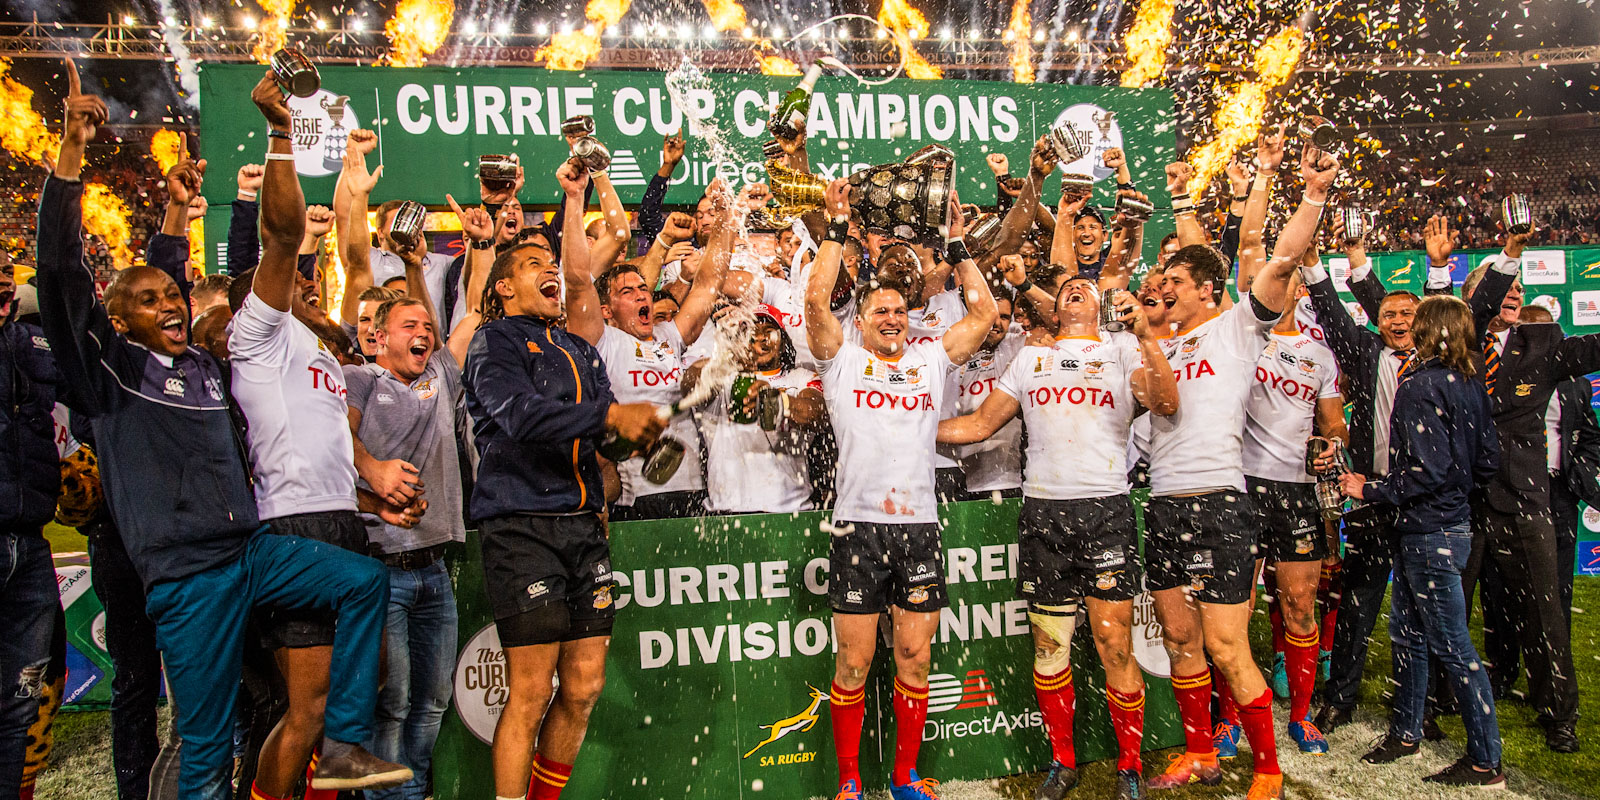 CURRIE CUP PREMIER DIV SA Rugby